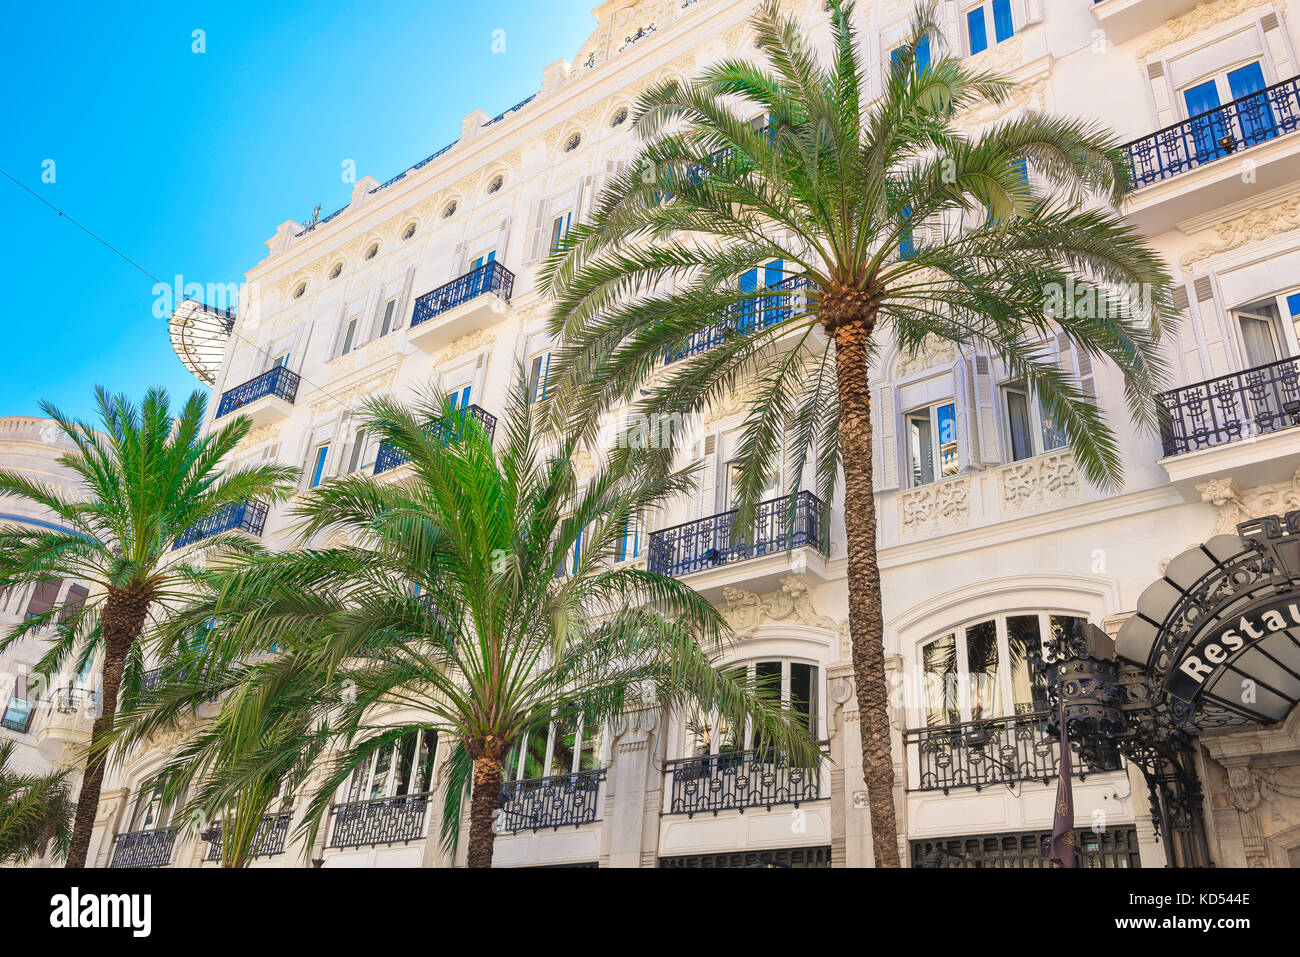 Mediterranean city street, view of the Hotel Reina Victoria in the palm tree lined Calle las Barcas in the center of Valencia, Spain. Stock Photo